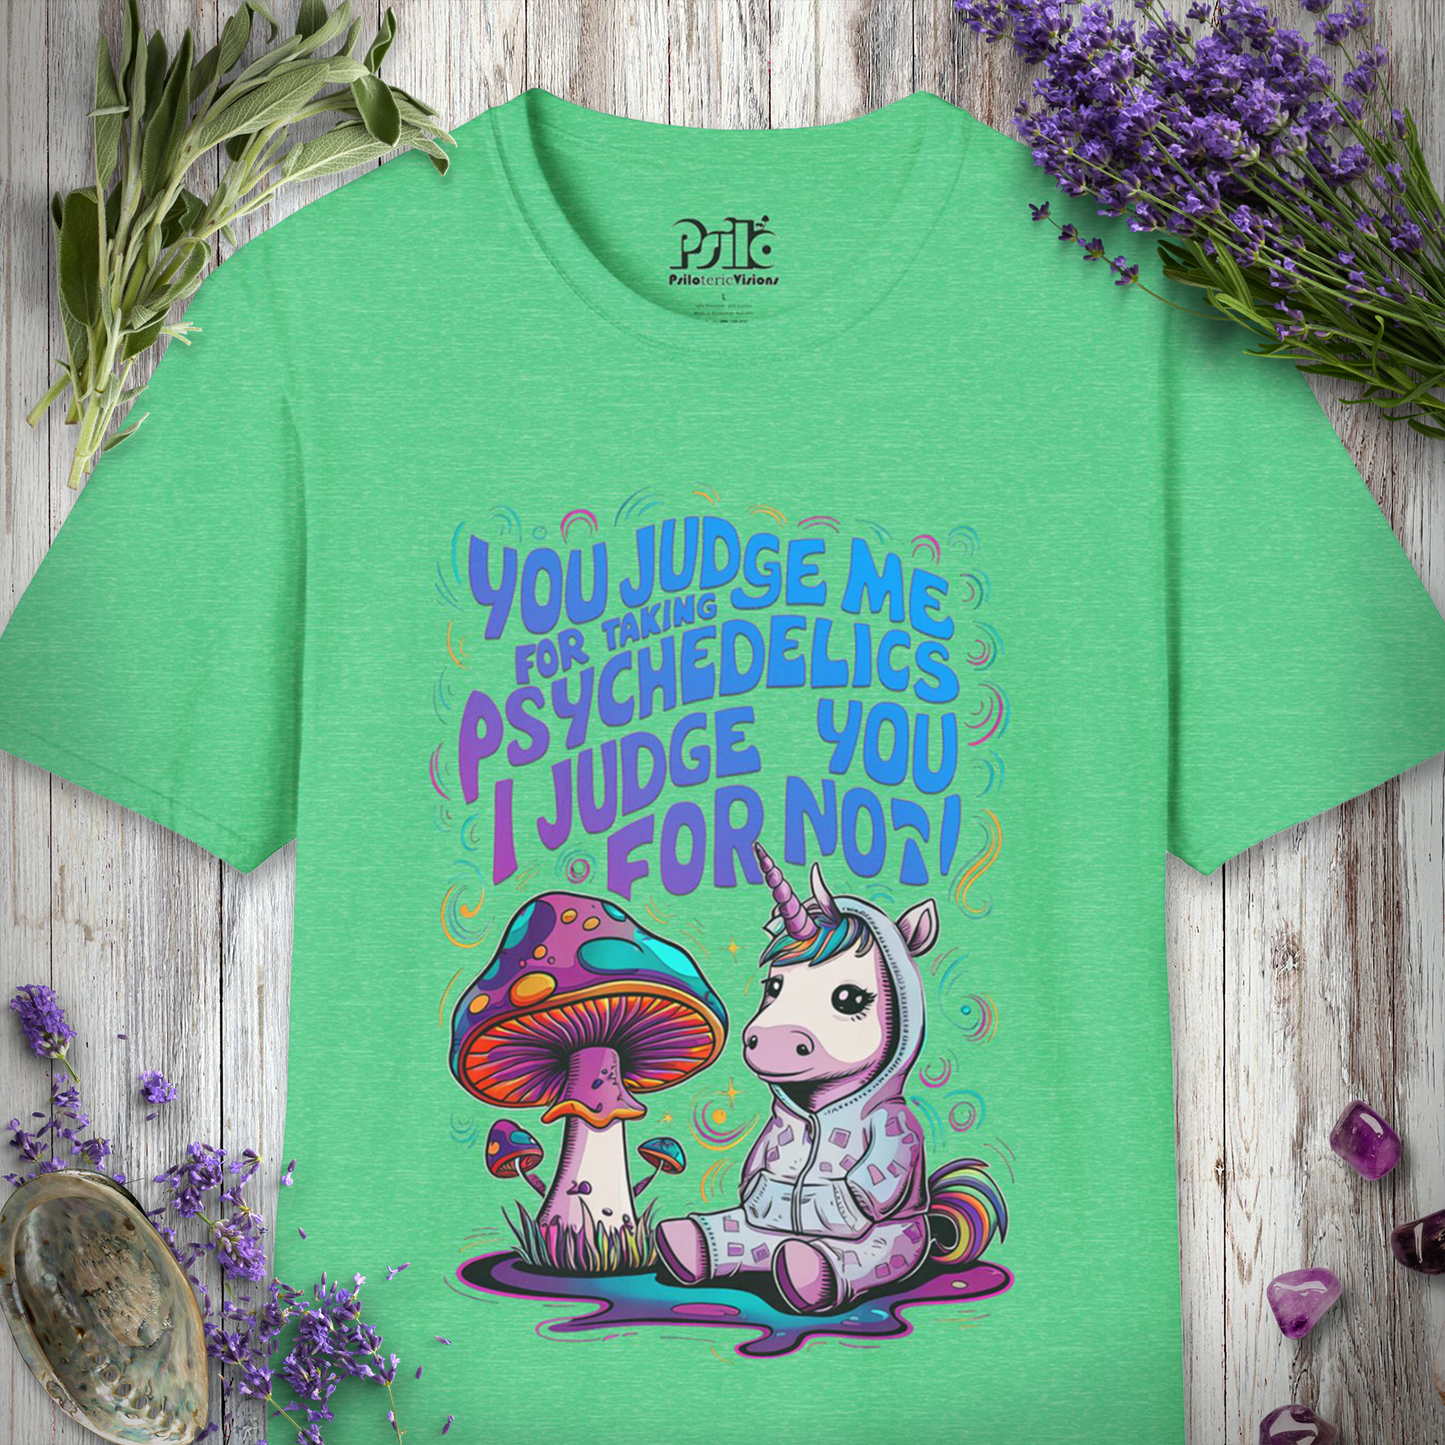 "You Judge Me For Taking Psychedelics, I Judge You For Not" Unisex SOFTSTYLE T-SHIRT